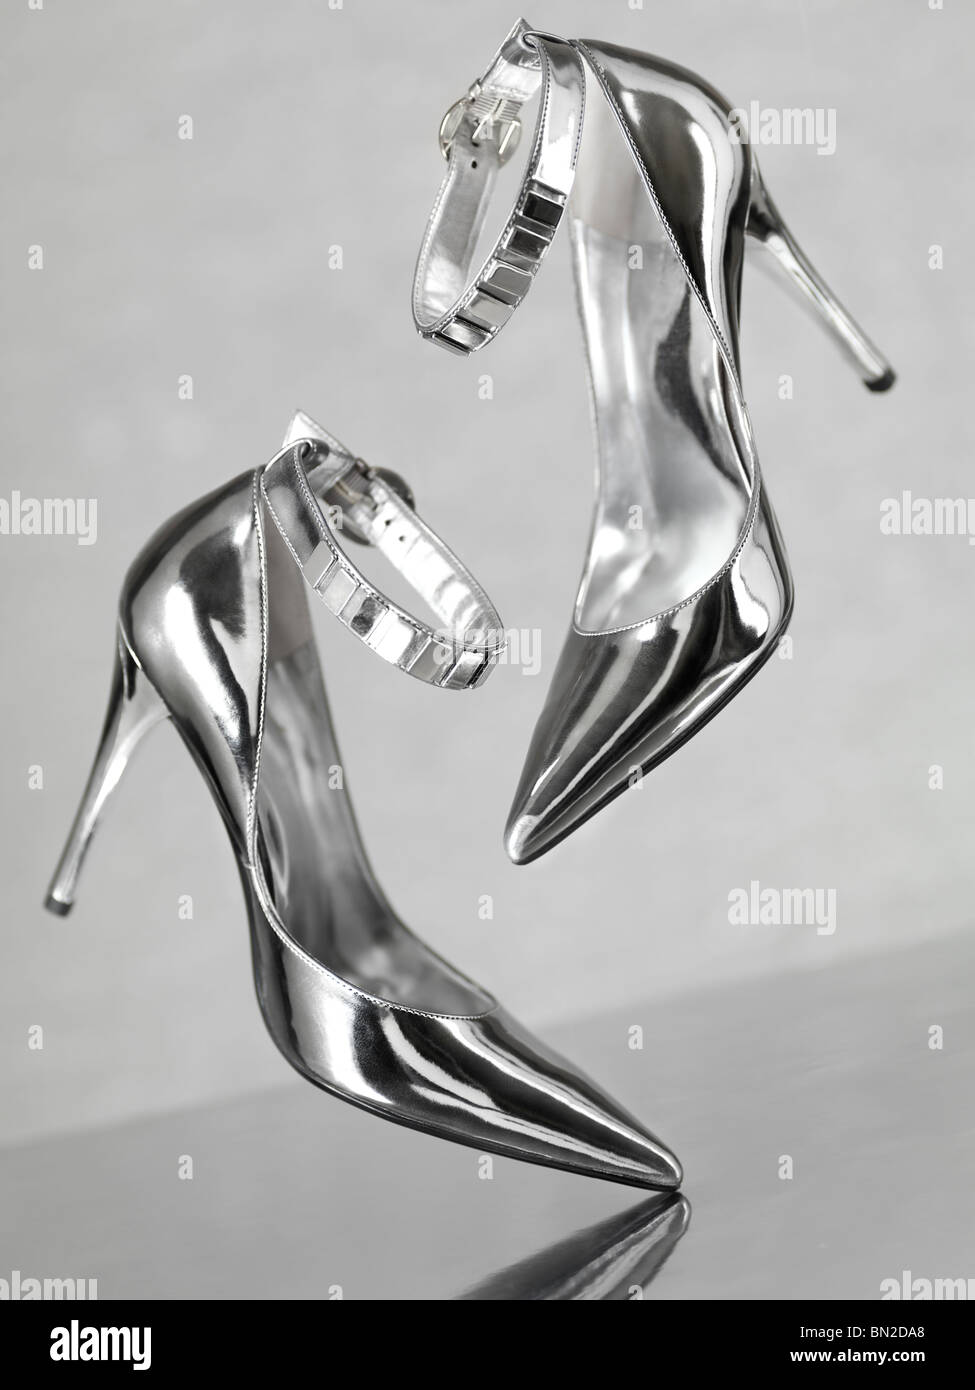 Buy > shiny silver high heels > in stock